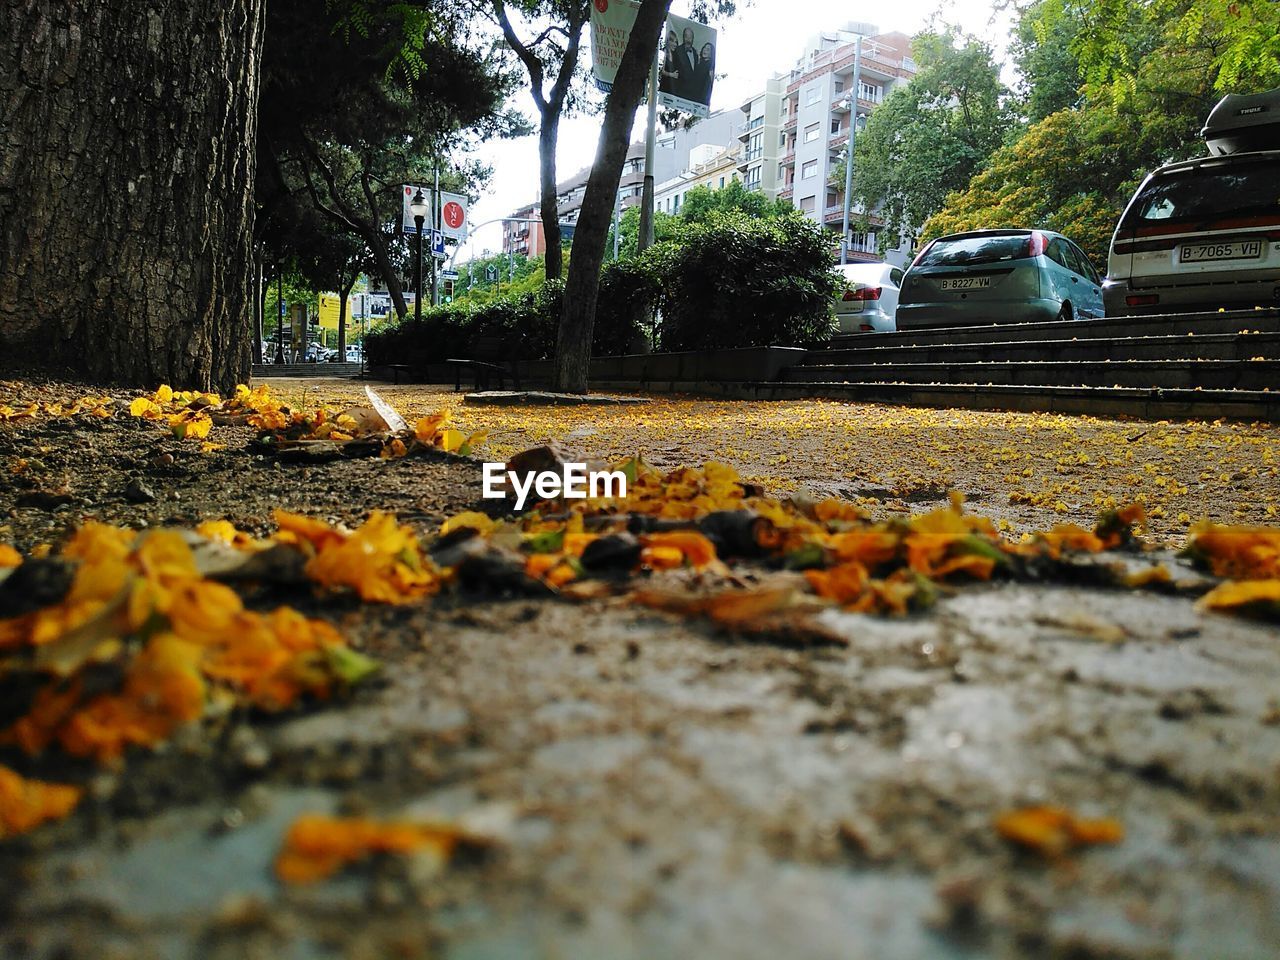 CLOSE-UP OF AUTUMN LEAVES ON ROAD